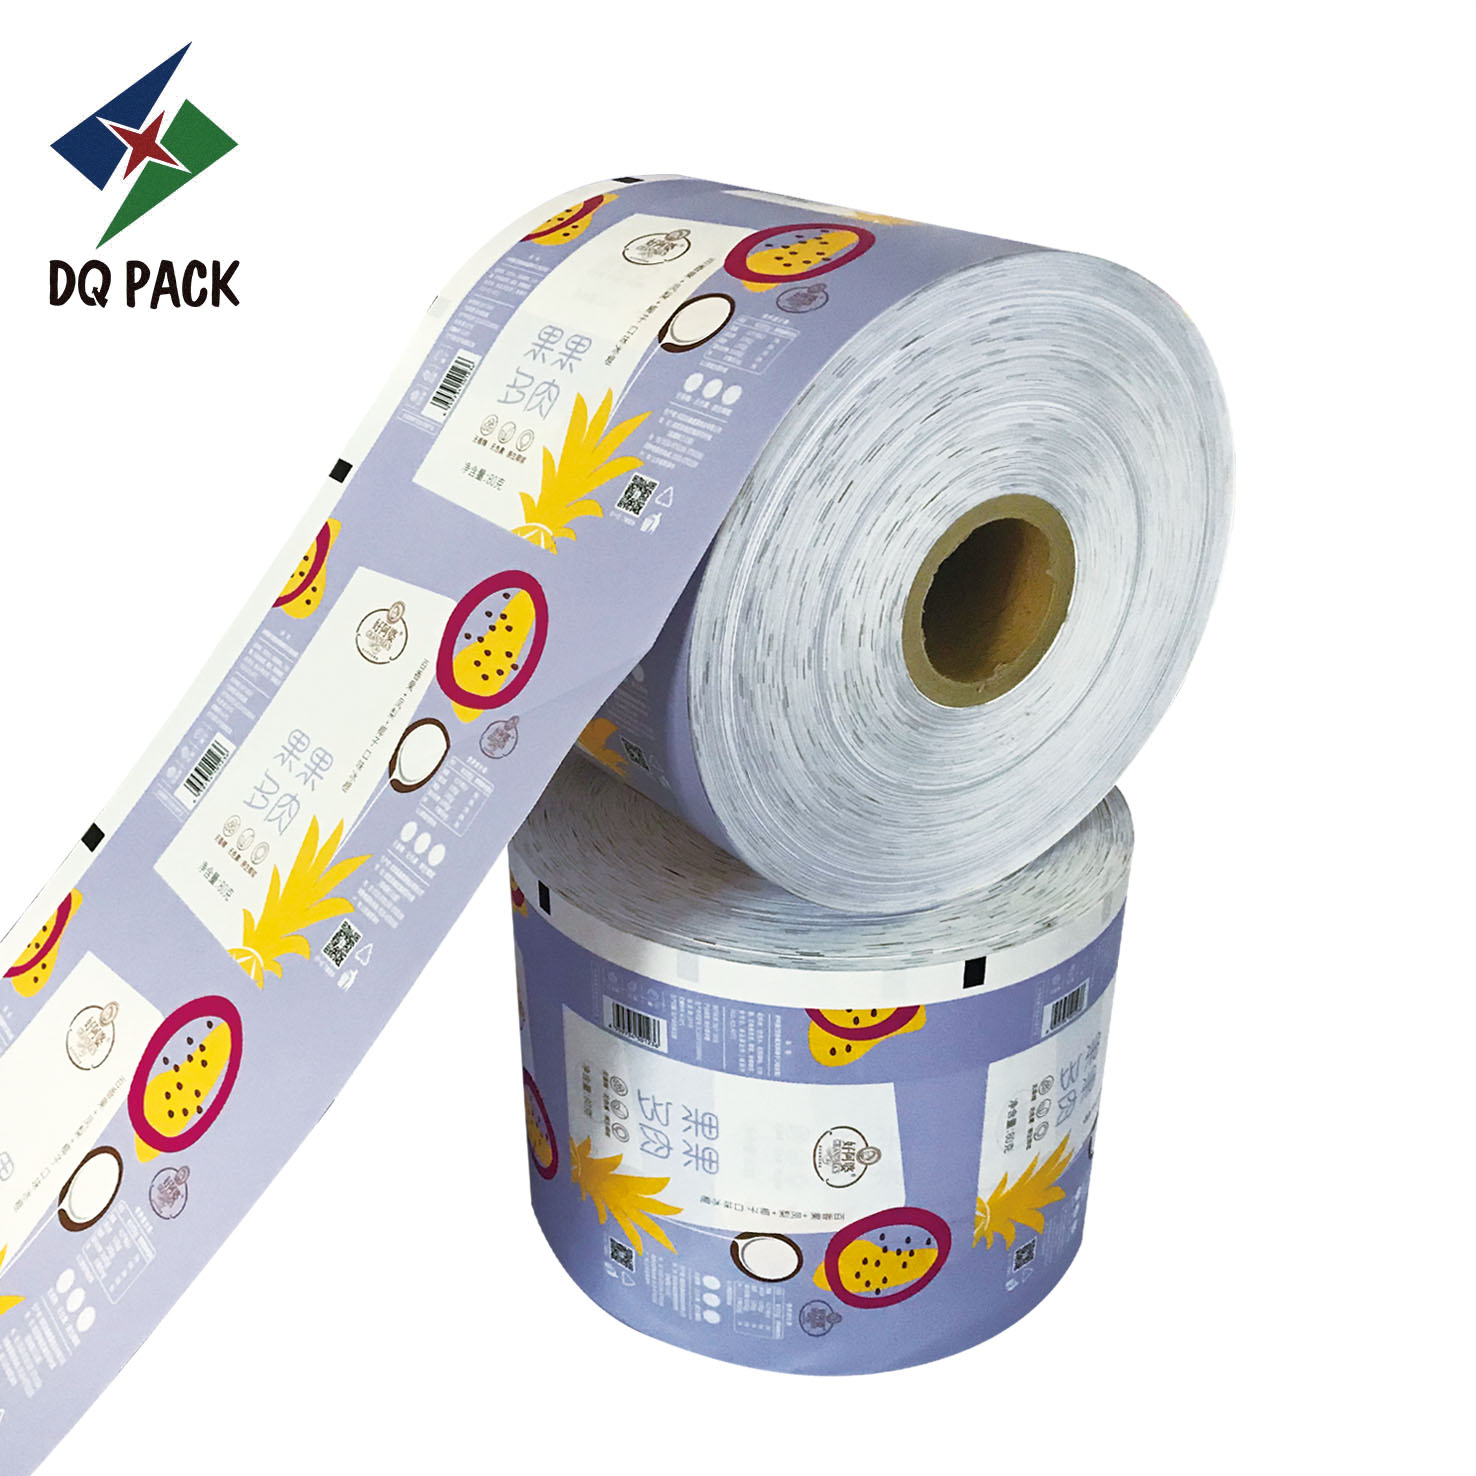 DQ PACK Customized printing Flexible Packaging Films  Fruit Snack roll film Flexible Packaging Roll Film